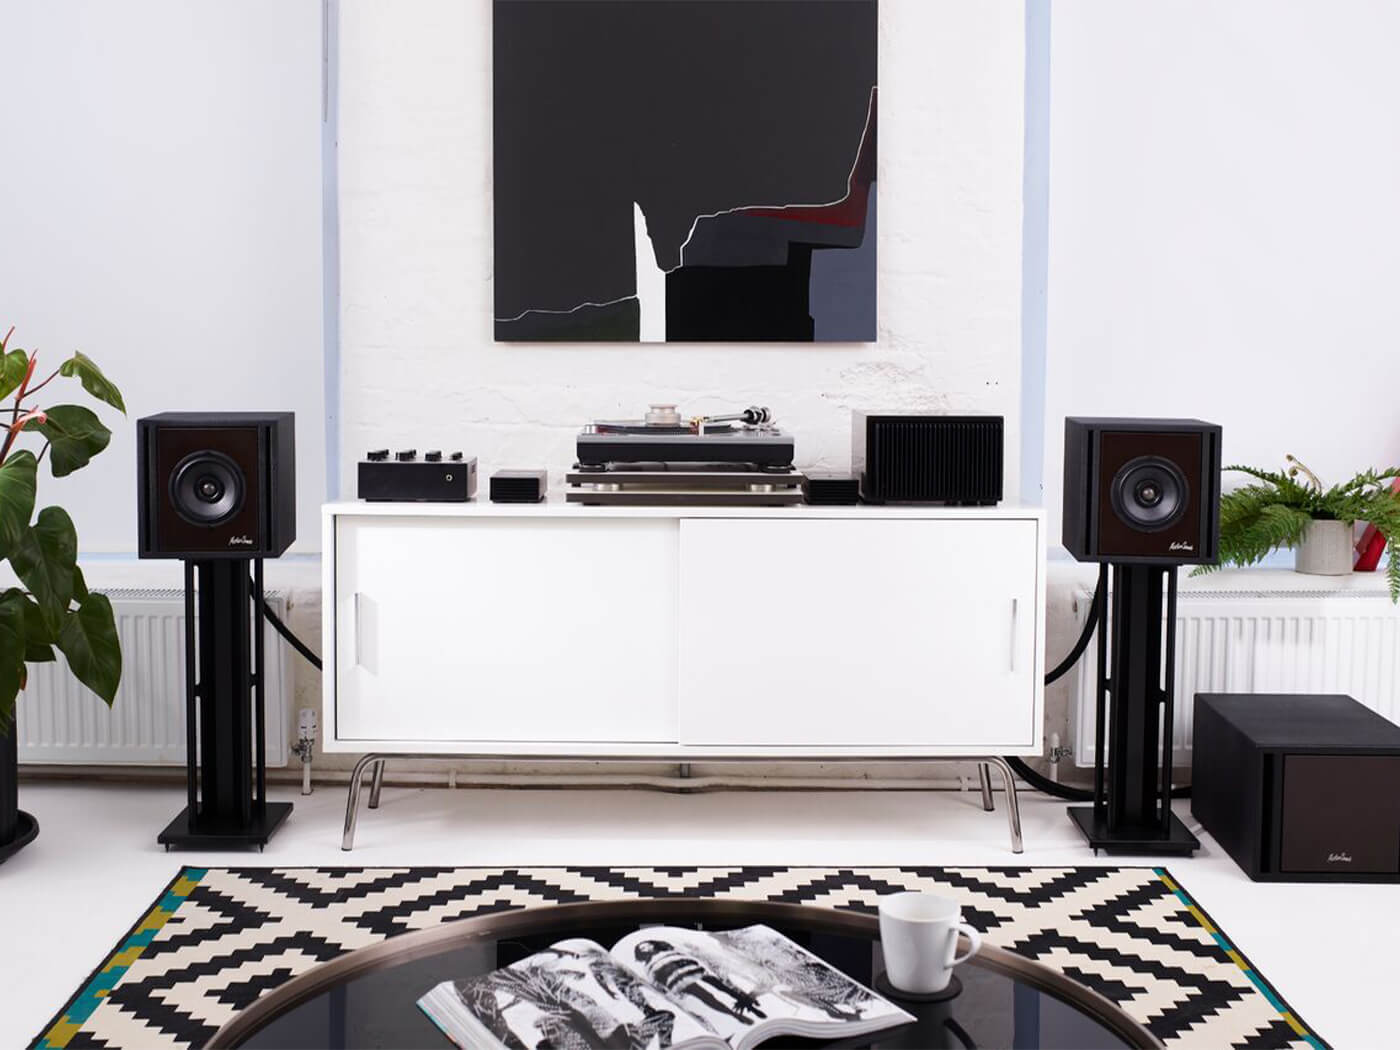 Clarity MasterSounds home set-up